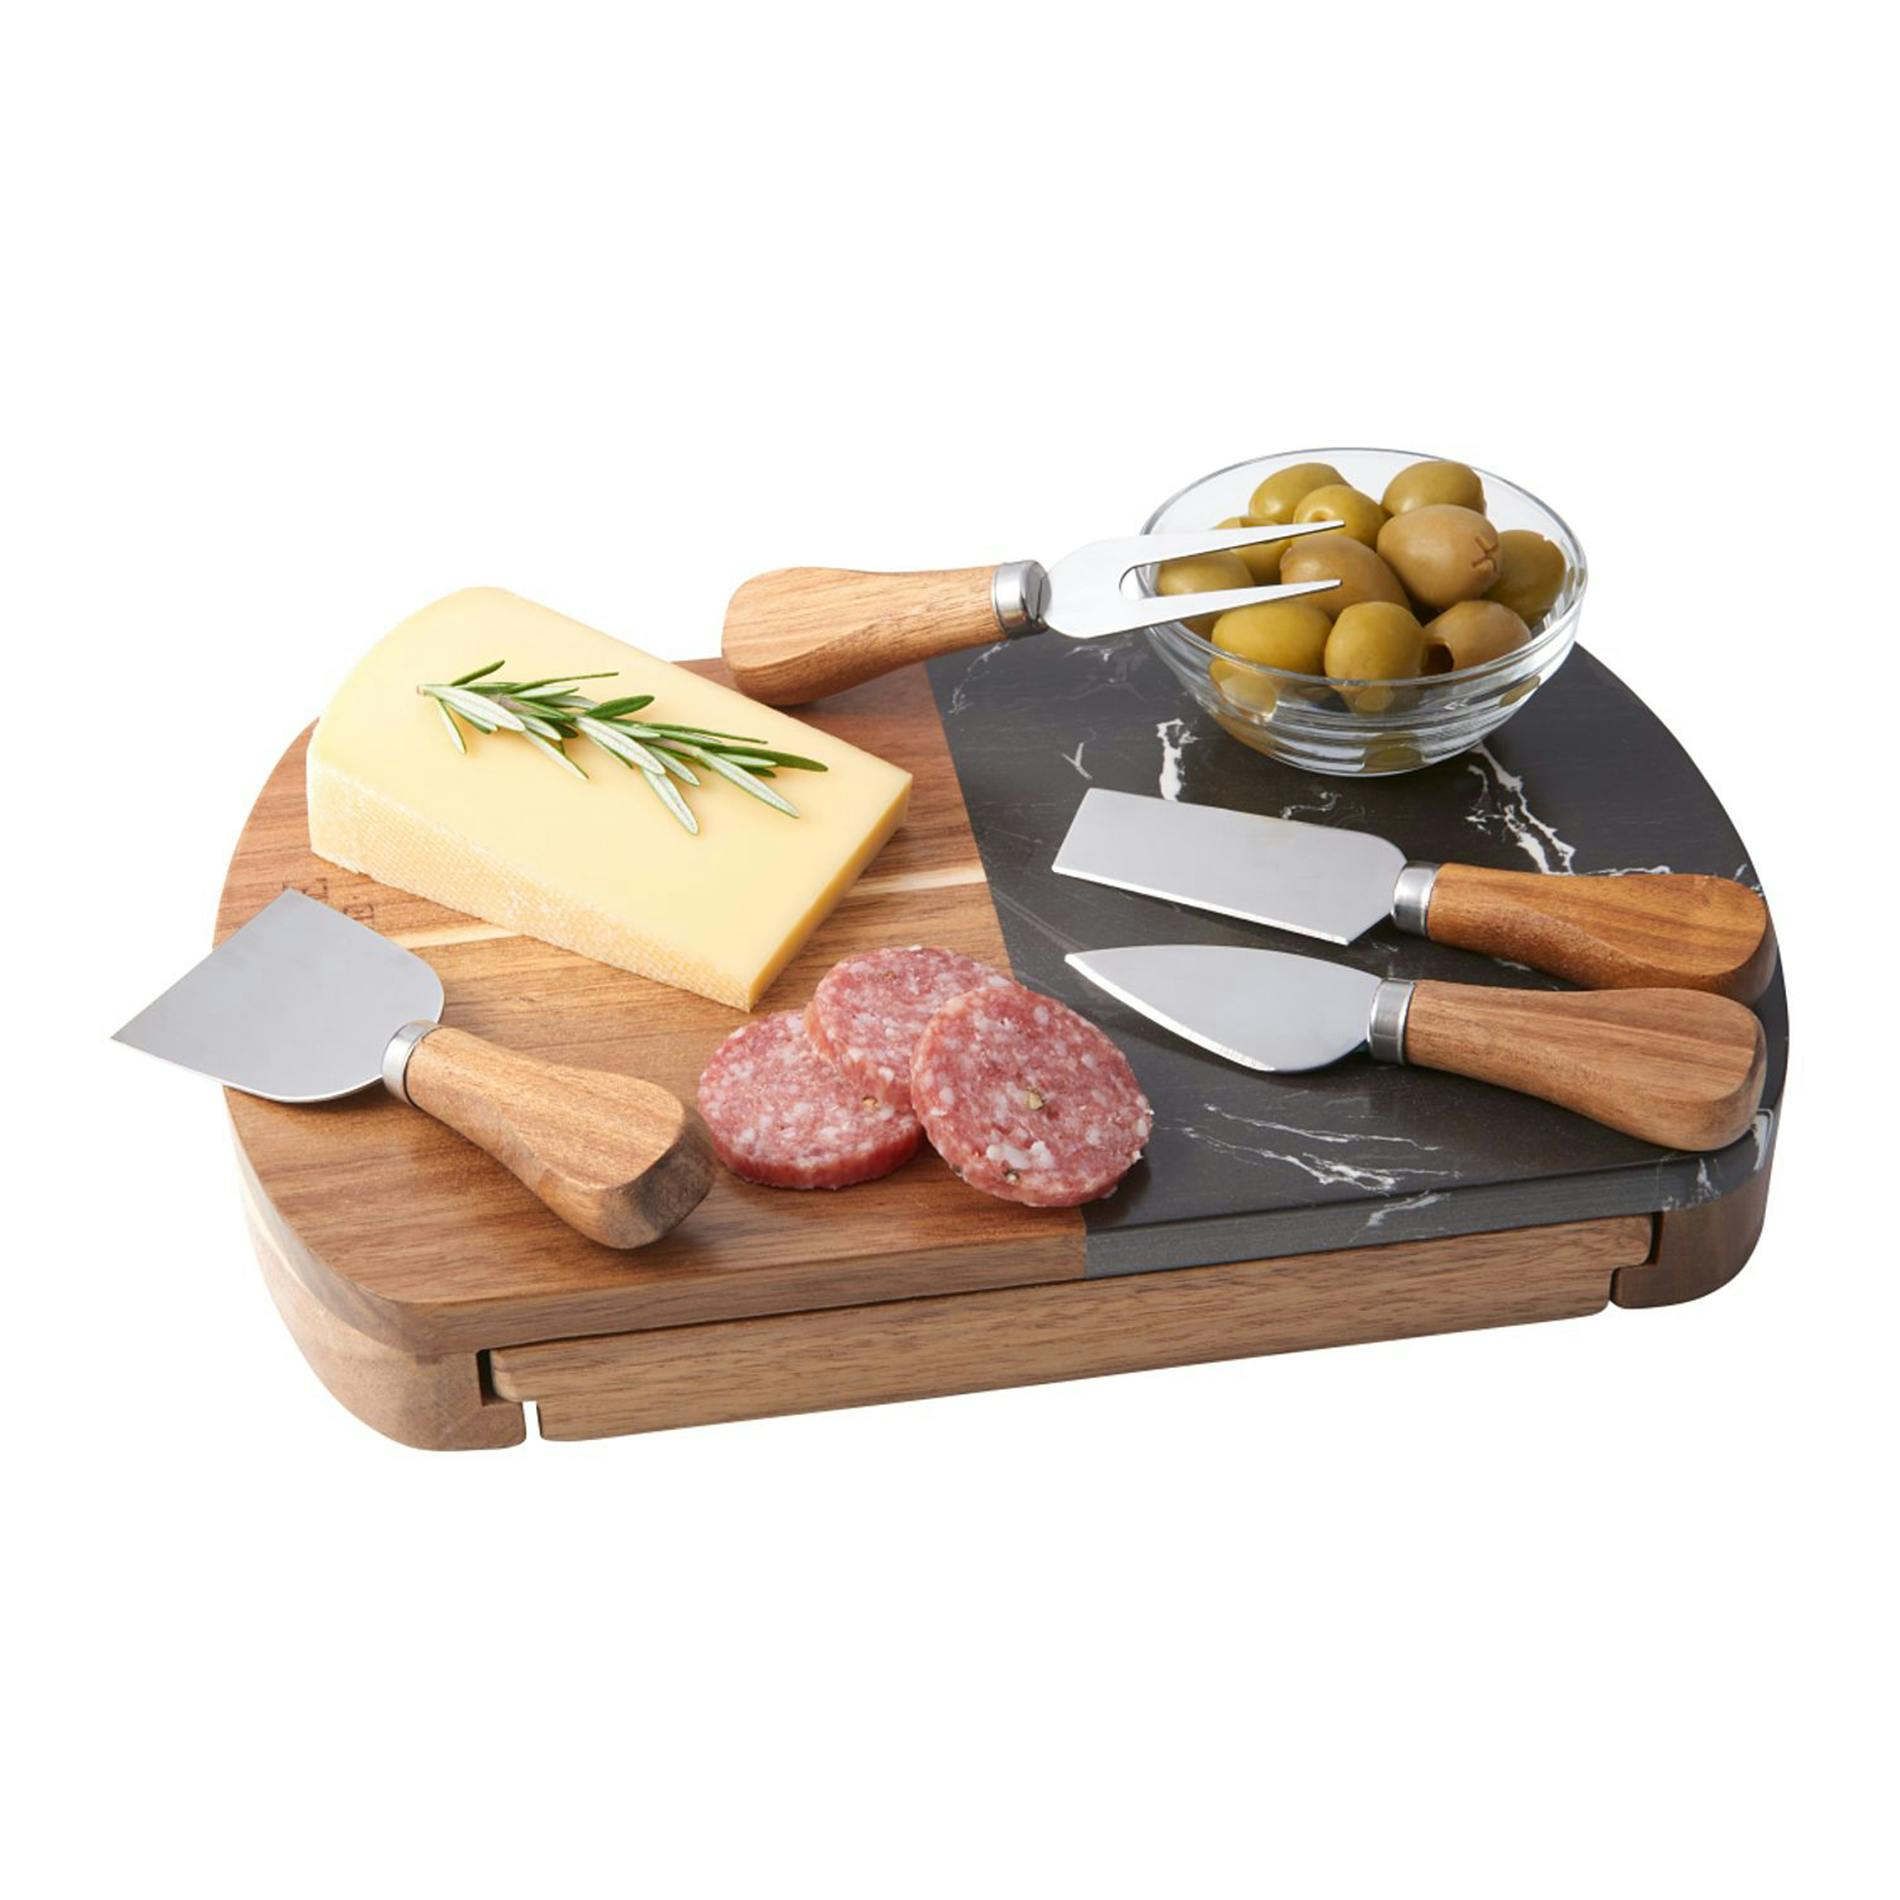 Black Marble Cheese Board Set with Knives - additional Image 2